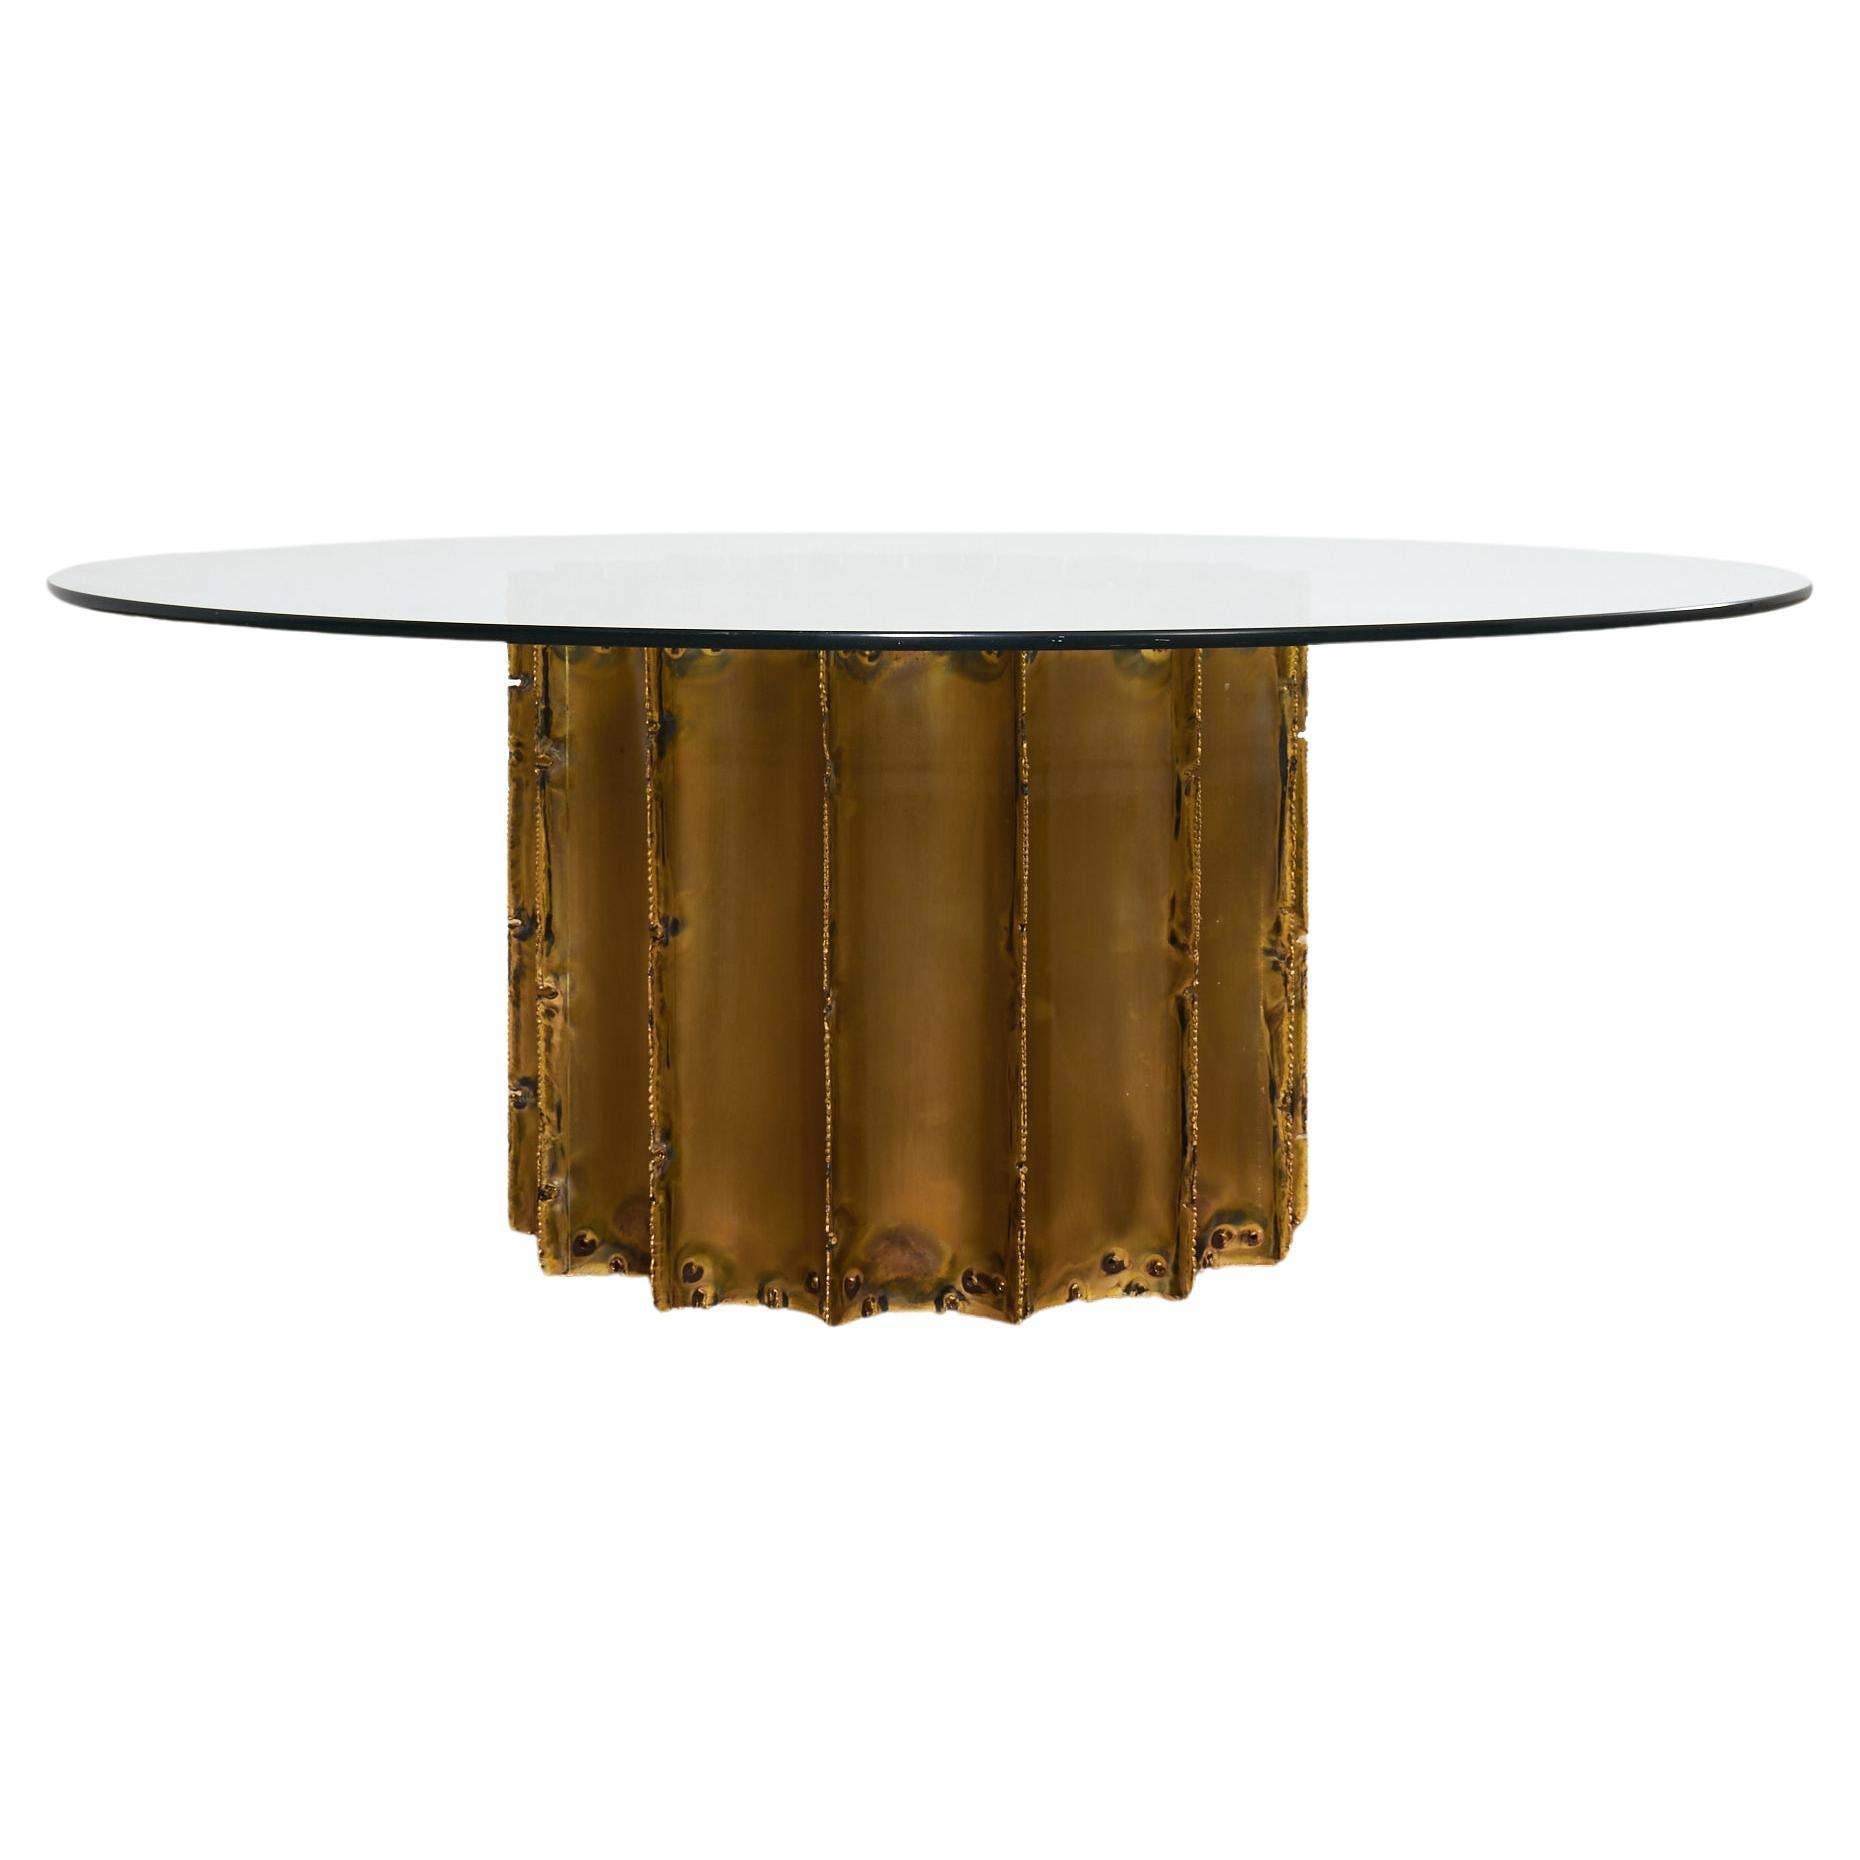 Silas Seandel Style Brutalist Torch Cut Cocktail Table For Sale